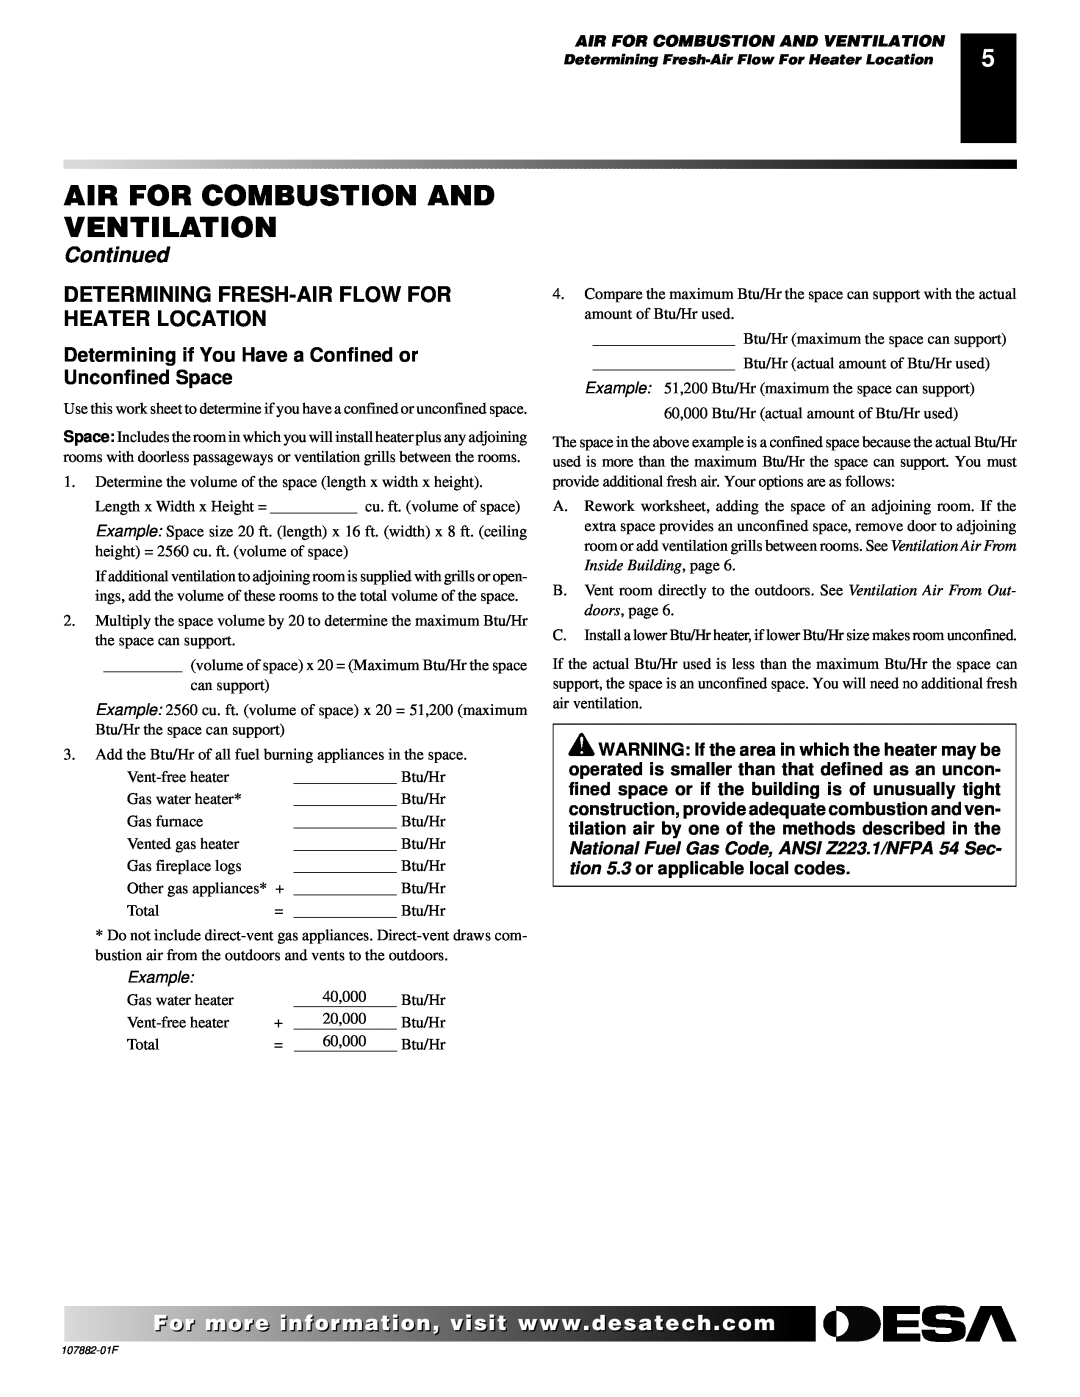 Desa CBN20 installation manual Continued, Air For Combustion And Ventilation 